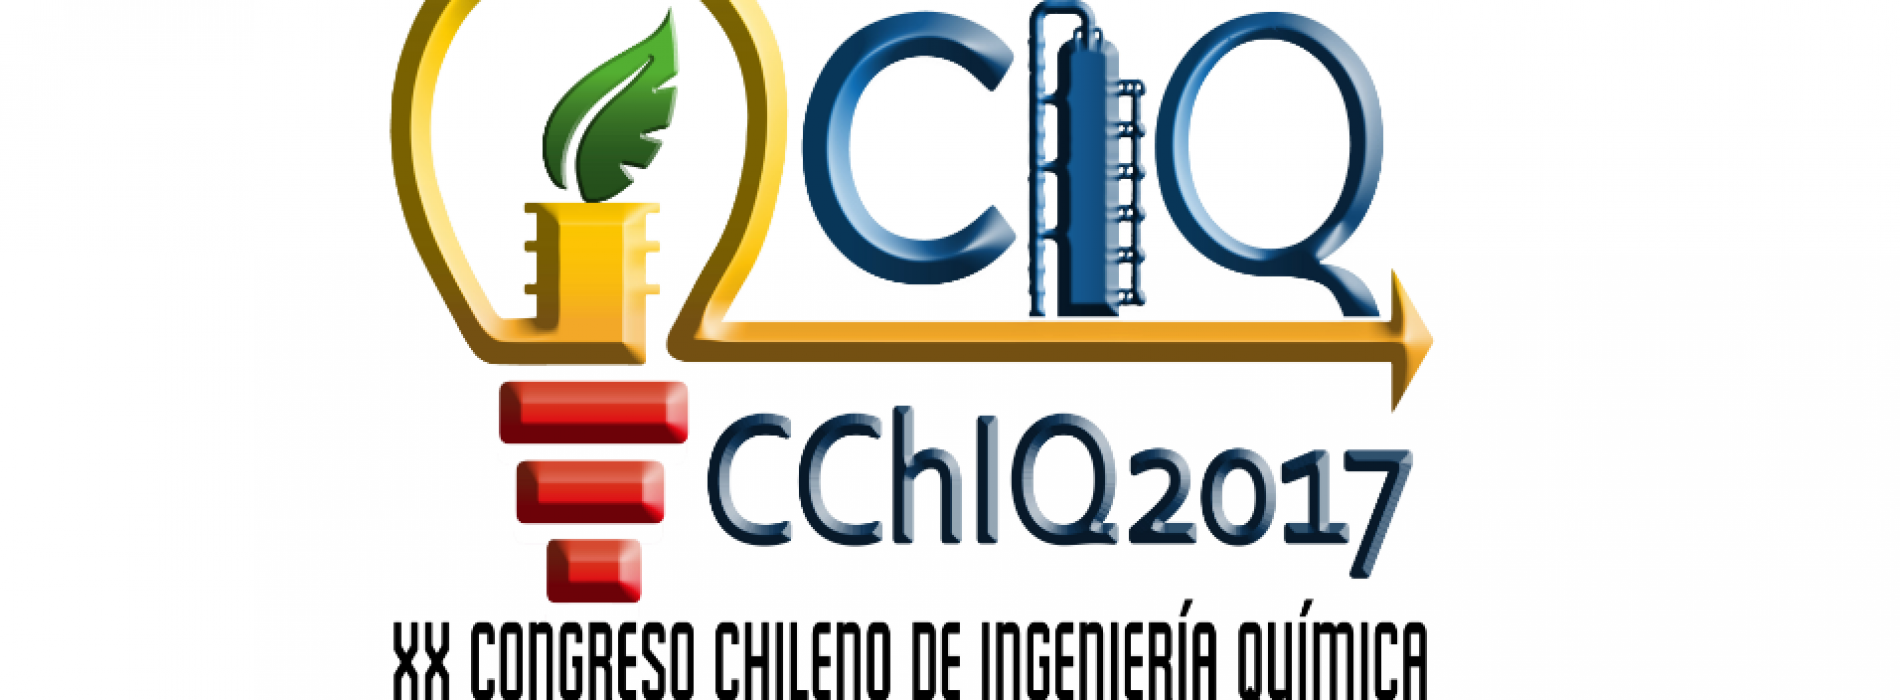 XX Chilean Congress of chemical engineering